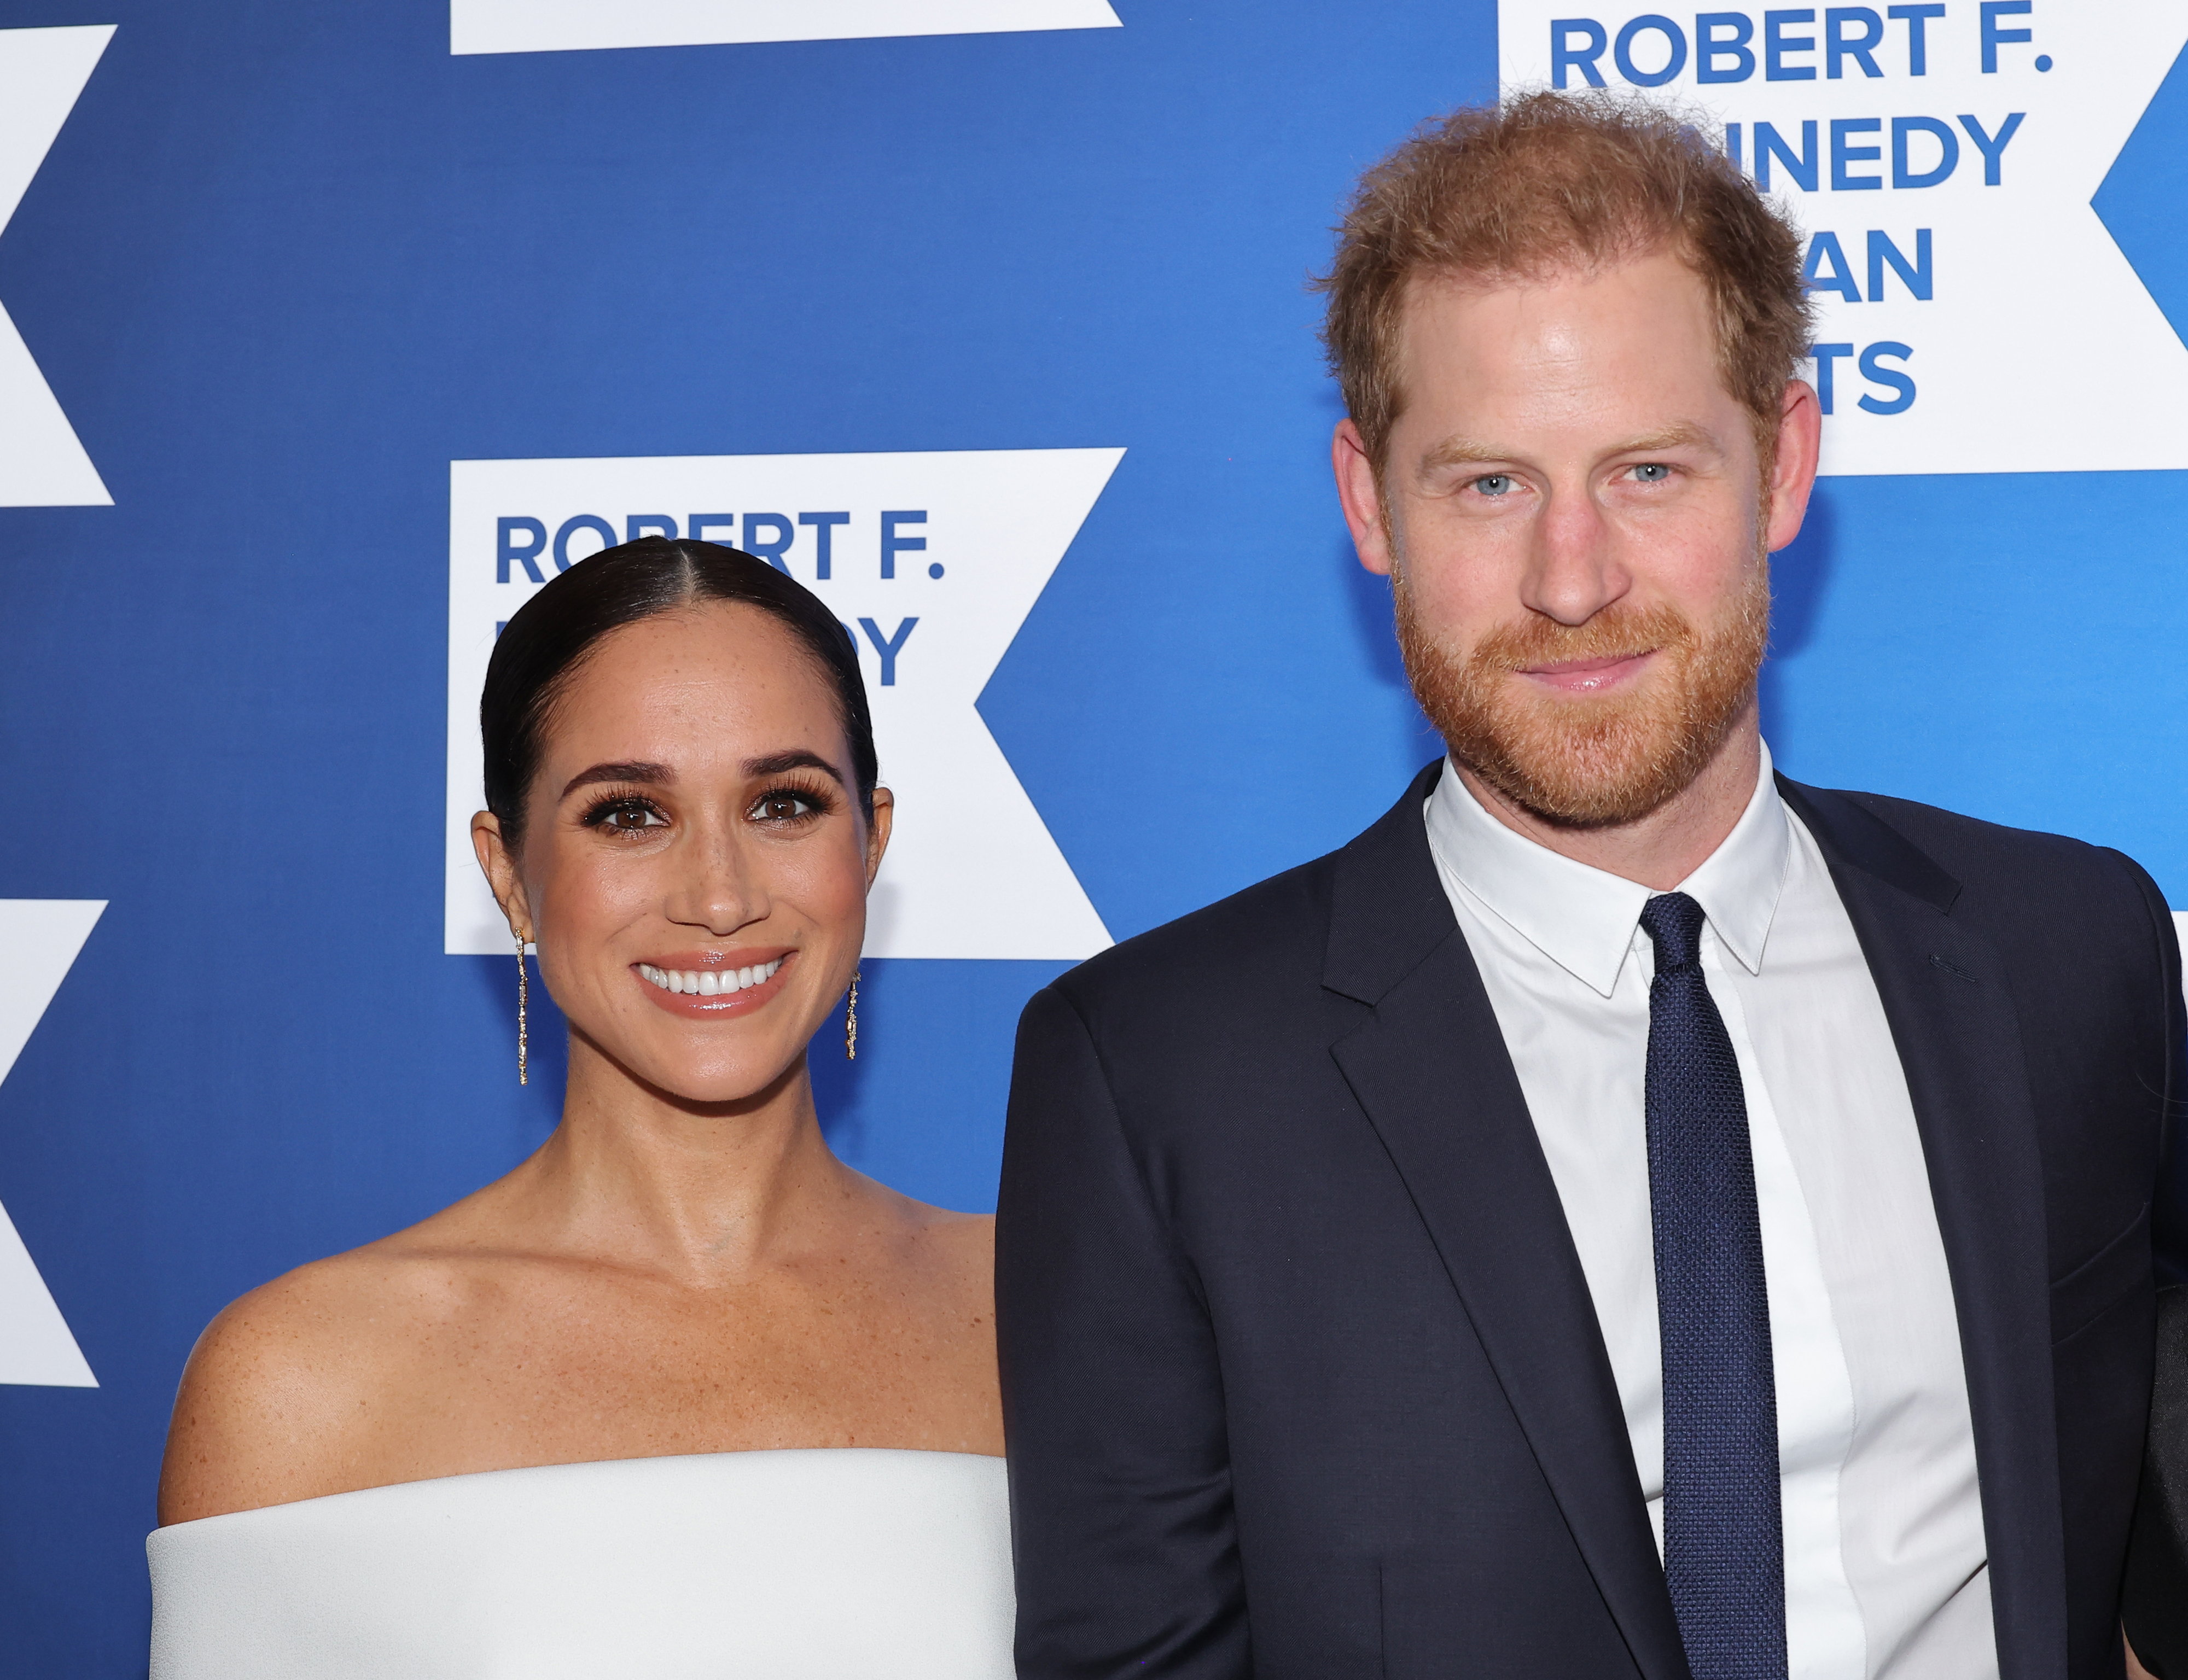 Closeup of Meghan and Harry at an event